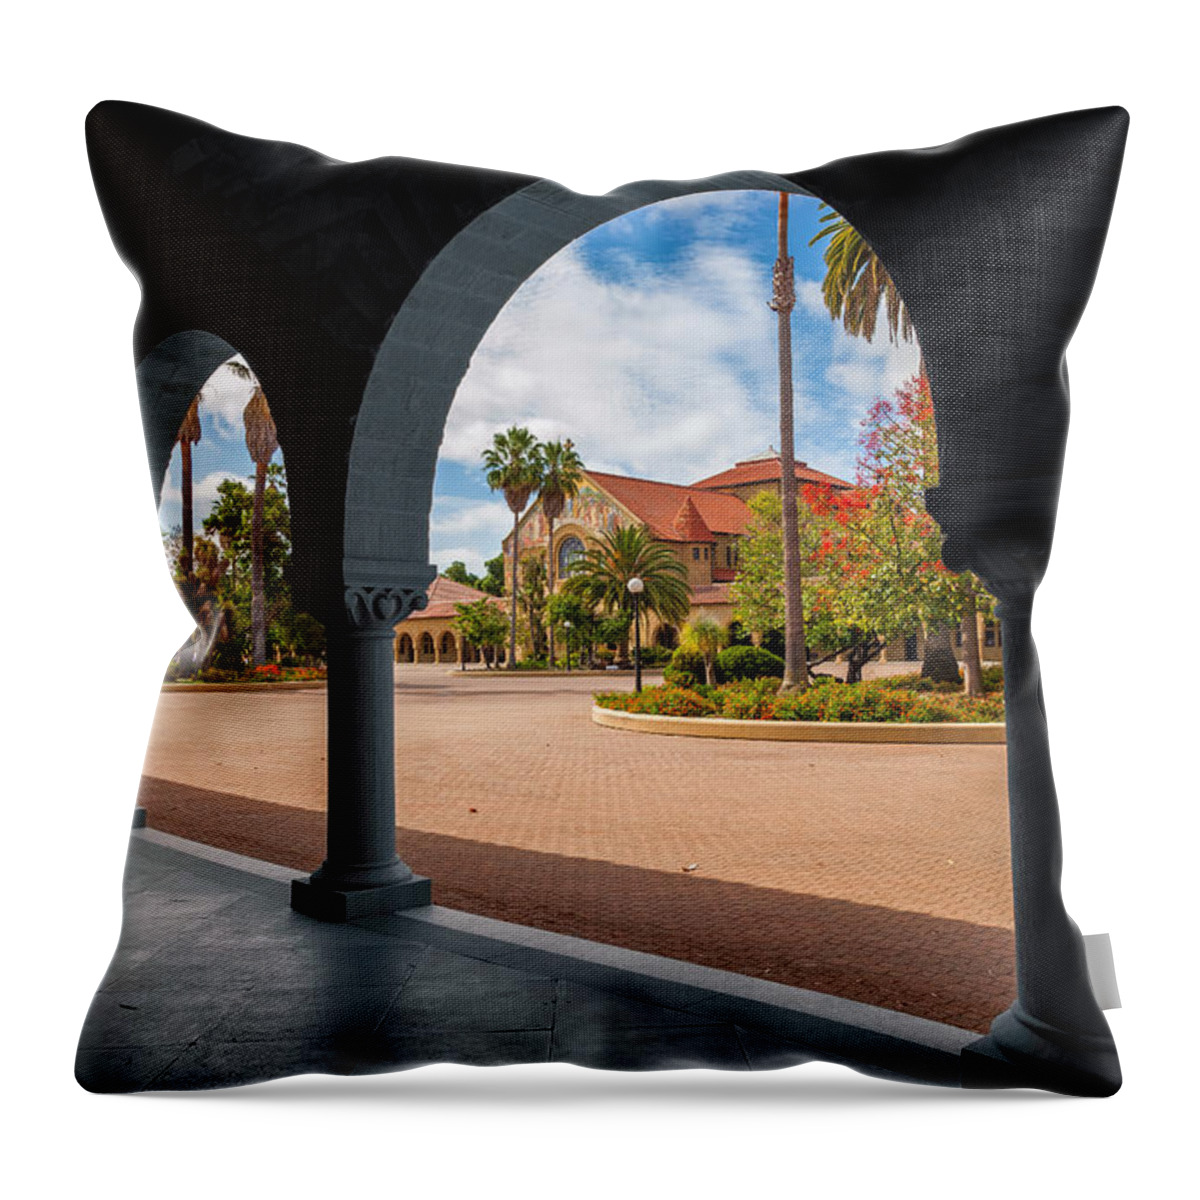 City Throw Pillow featuring the photograph Stanford Campus by Jonathan Nguyen